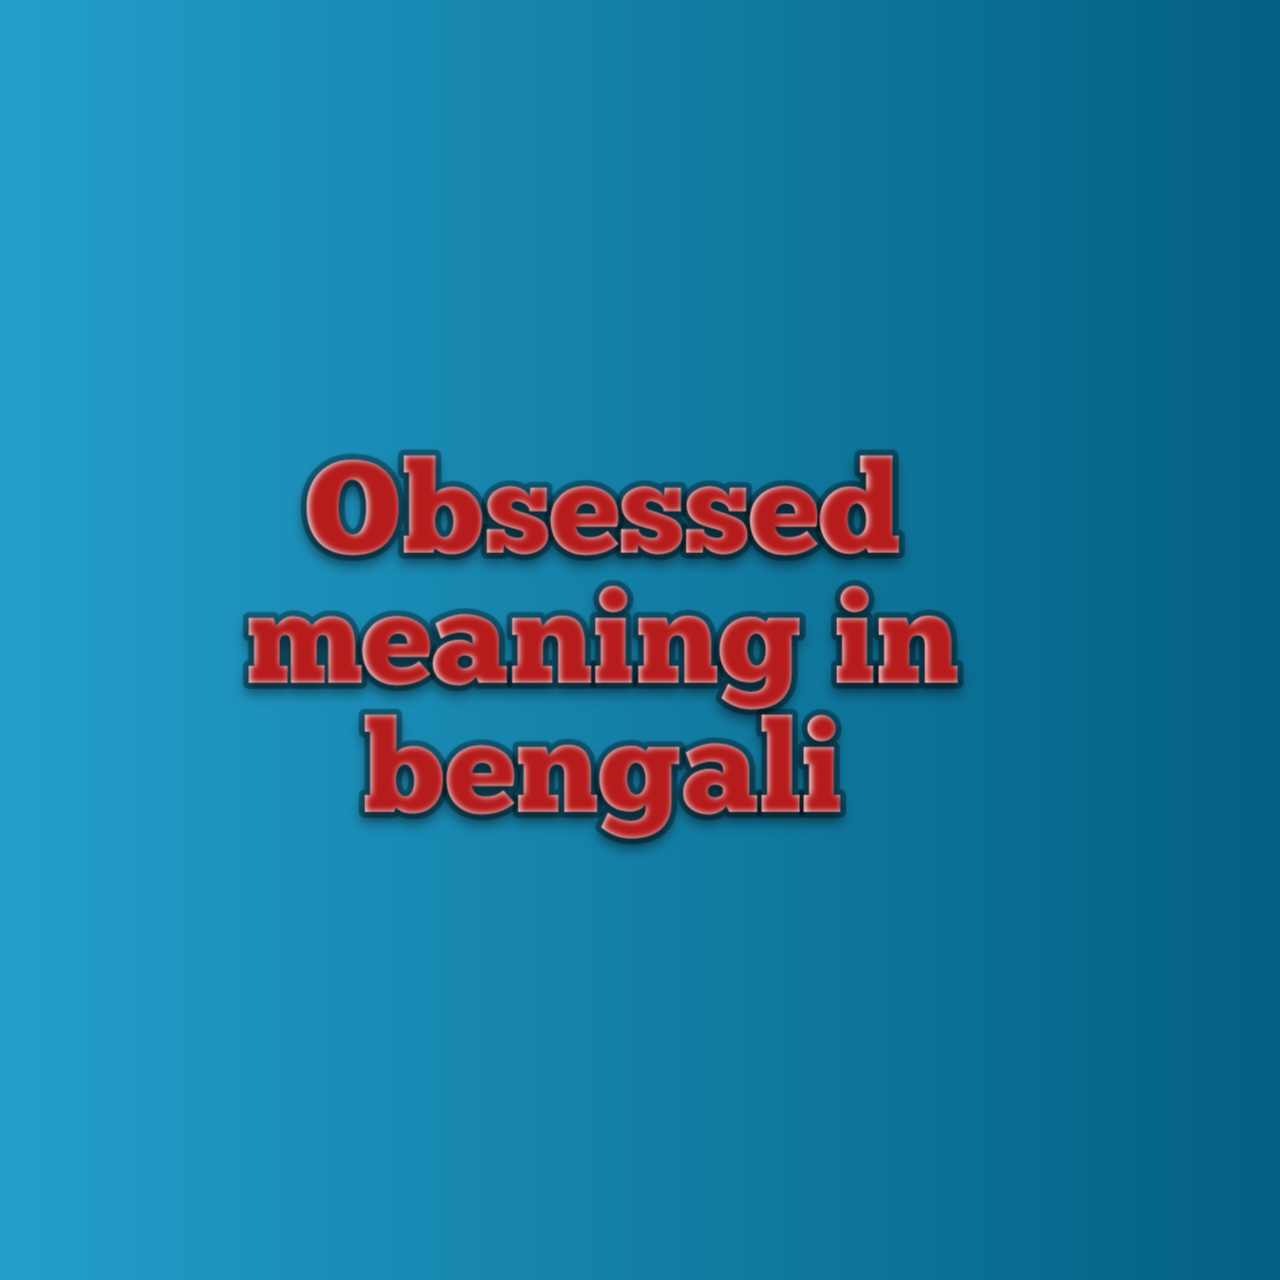 obsessed meaning in bengali, obsessed with you meaning in bengali, i am obsessed meaning in bengali, self obsessed meaning in bengali, meaning of obsessed, obsessed meaning, obsessed with this song meaning in bengali, what is the meaning of obsessed, i am so obsessed meaning in bengali, self obsession meaning in bengali